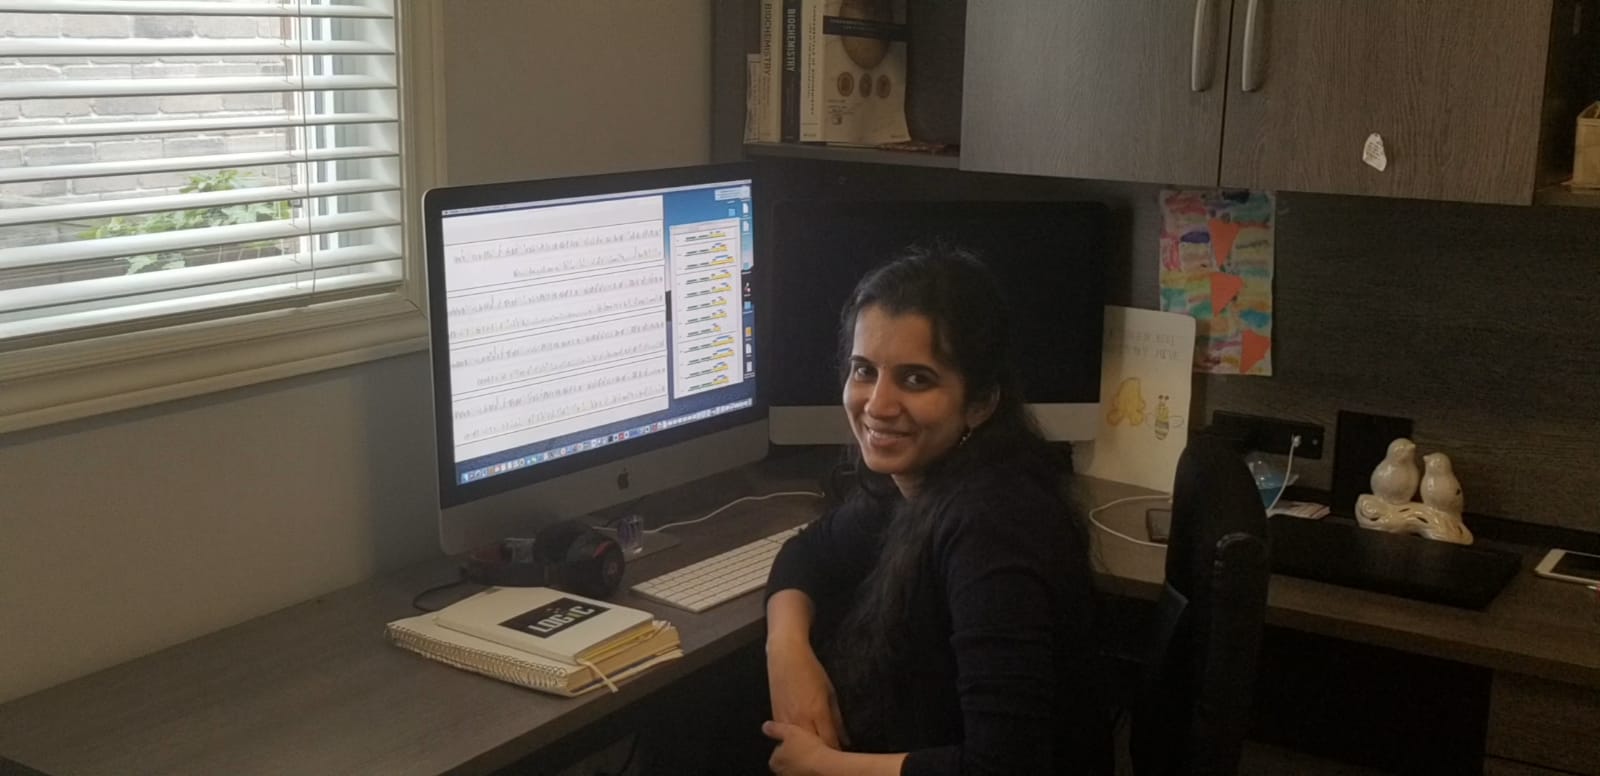 Subha Kalyaanamoorthy at her computer in her home office.